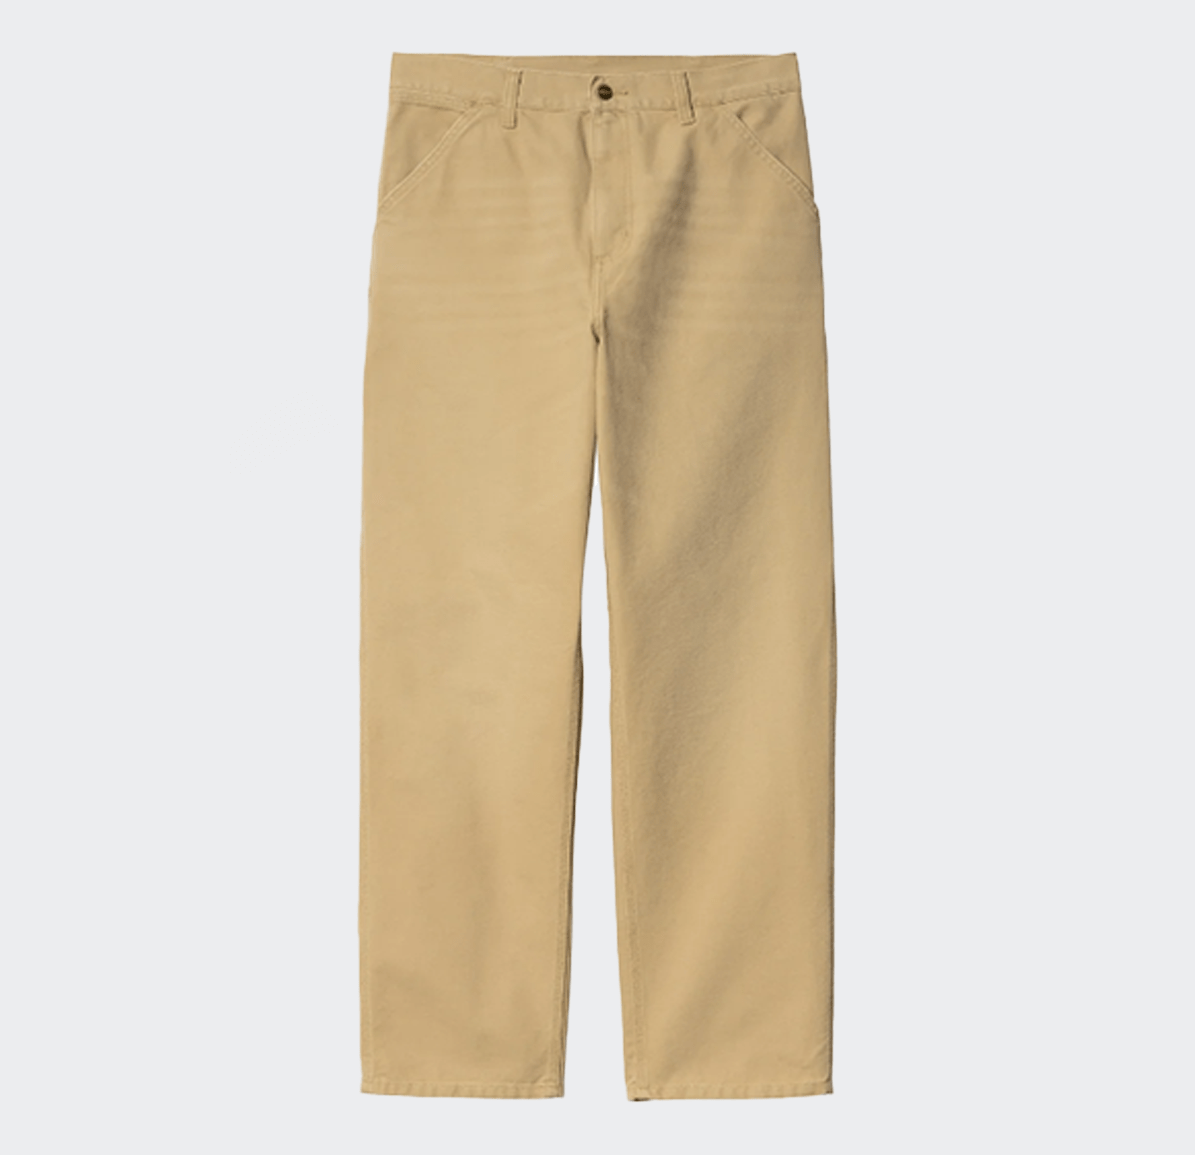 Carhartt WIP Single Knee Pant - Bourbon Aged Canvas - Carhartt WIP - State Of Play